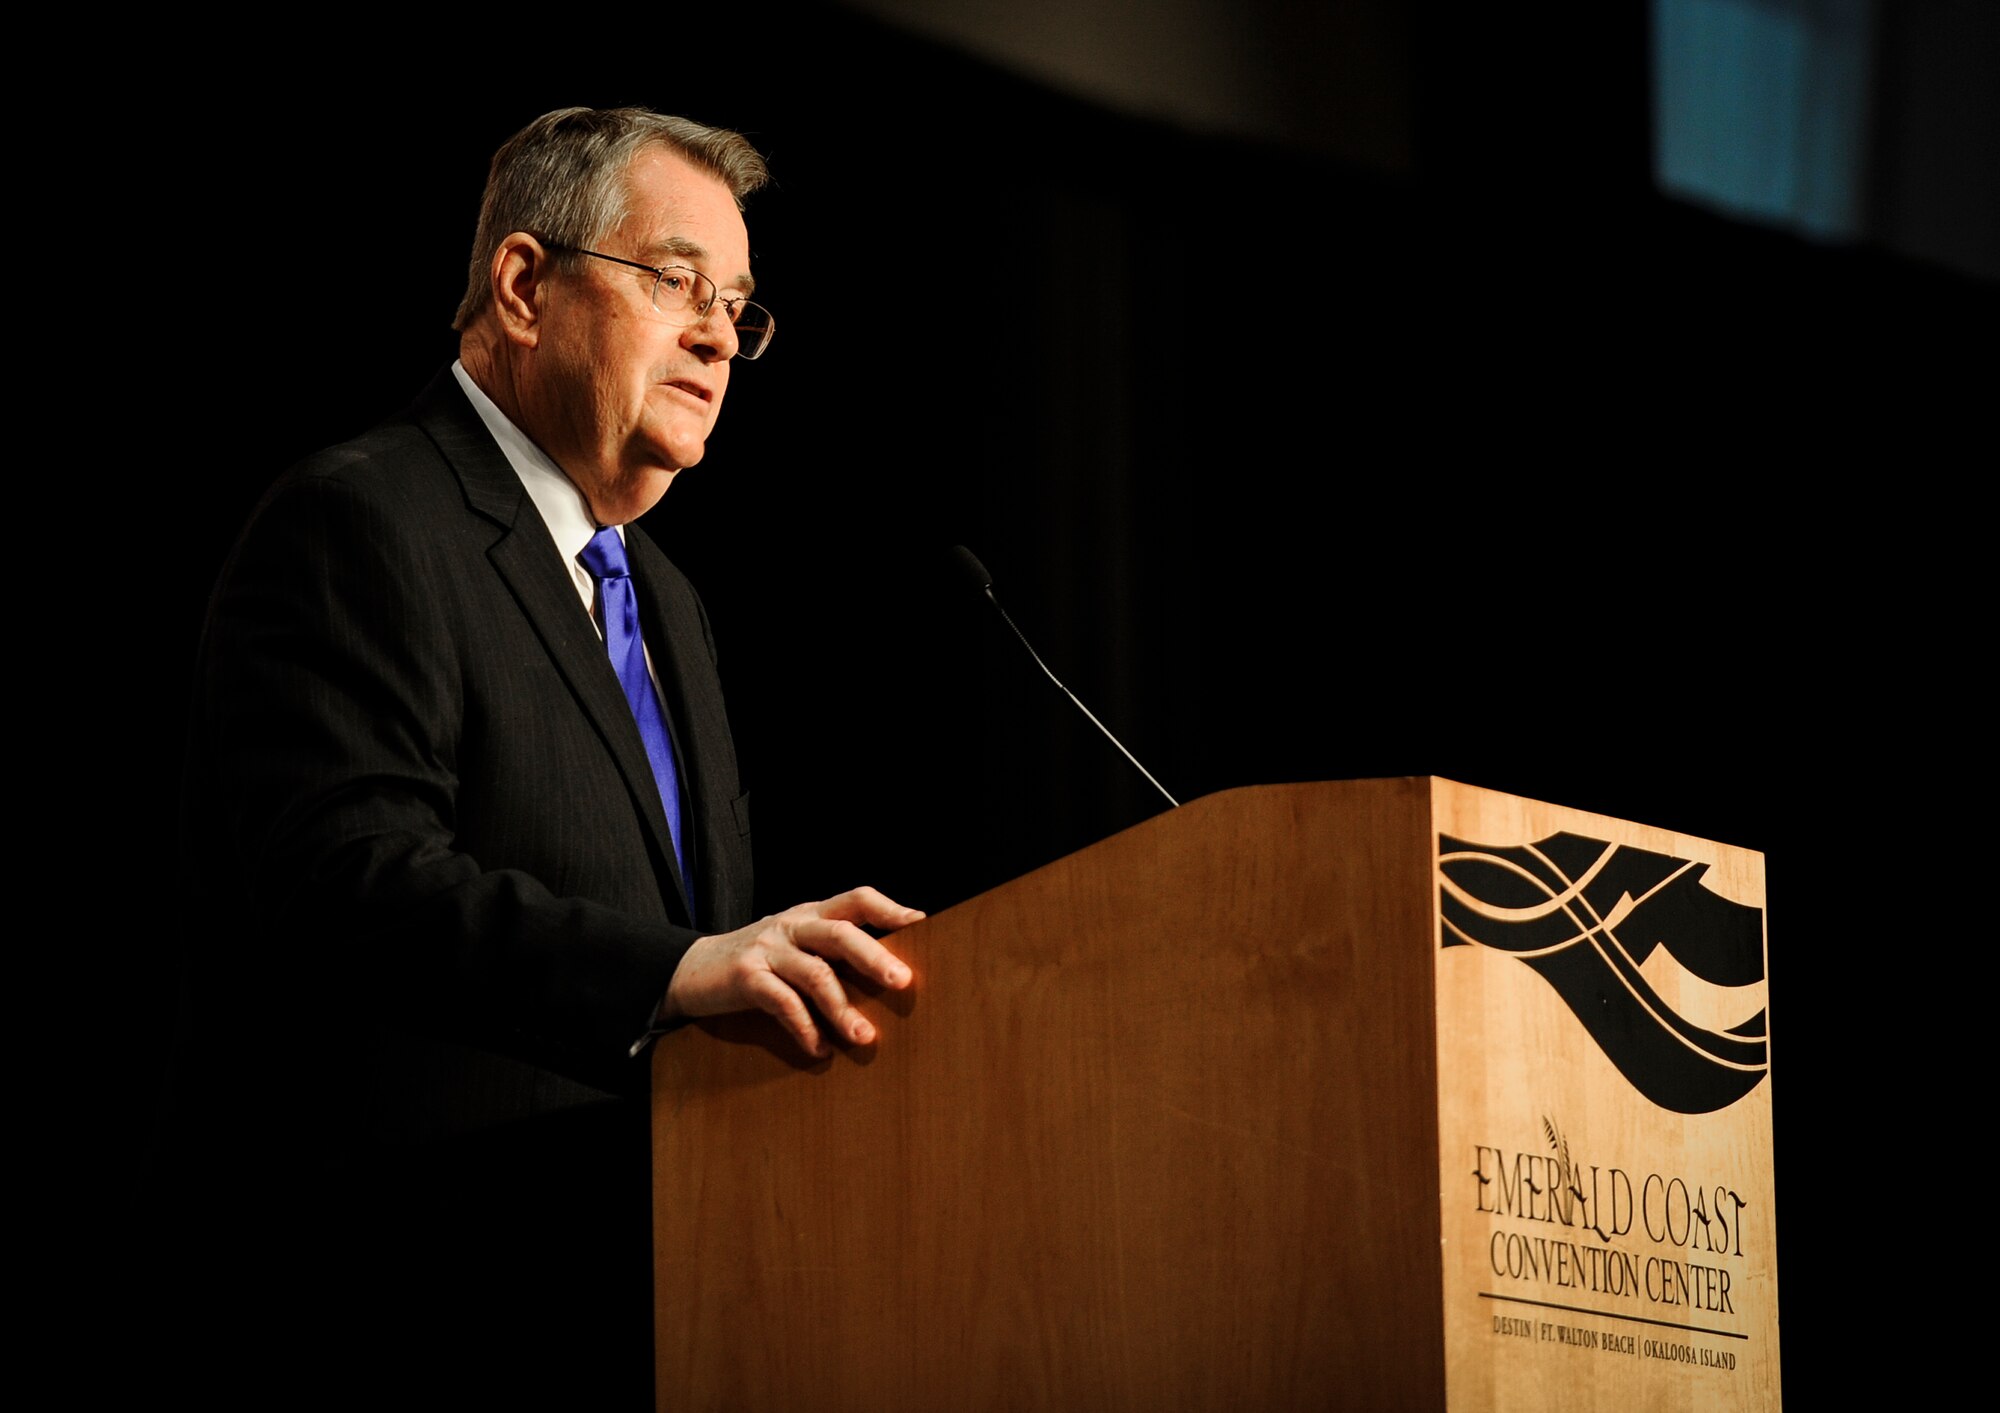 Sen. Don Gaetz, speaks during Chief Master Sgt. of the Air Force #9 James C. Binnicker’s celebration of life ceremony at the Emerald Coast Convention Center, Fort Walton Beach, Fla., March 28, 2015. Binnicker entered the Air Fore in August 1957 as a life support specialist. He retired Aug. 1, 1990, after 33 years of service. A memorial service and interment will be at Arlington Cemetery, Virginia, at a later date. (U.S. Air Force photo/Senior Airman Christopher Callaway)